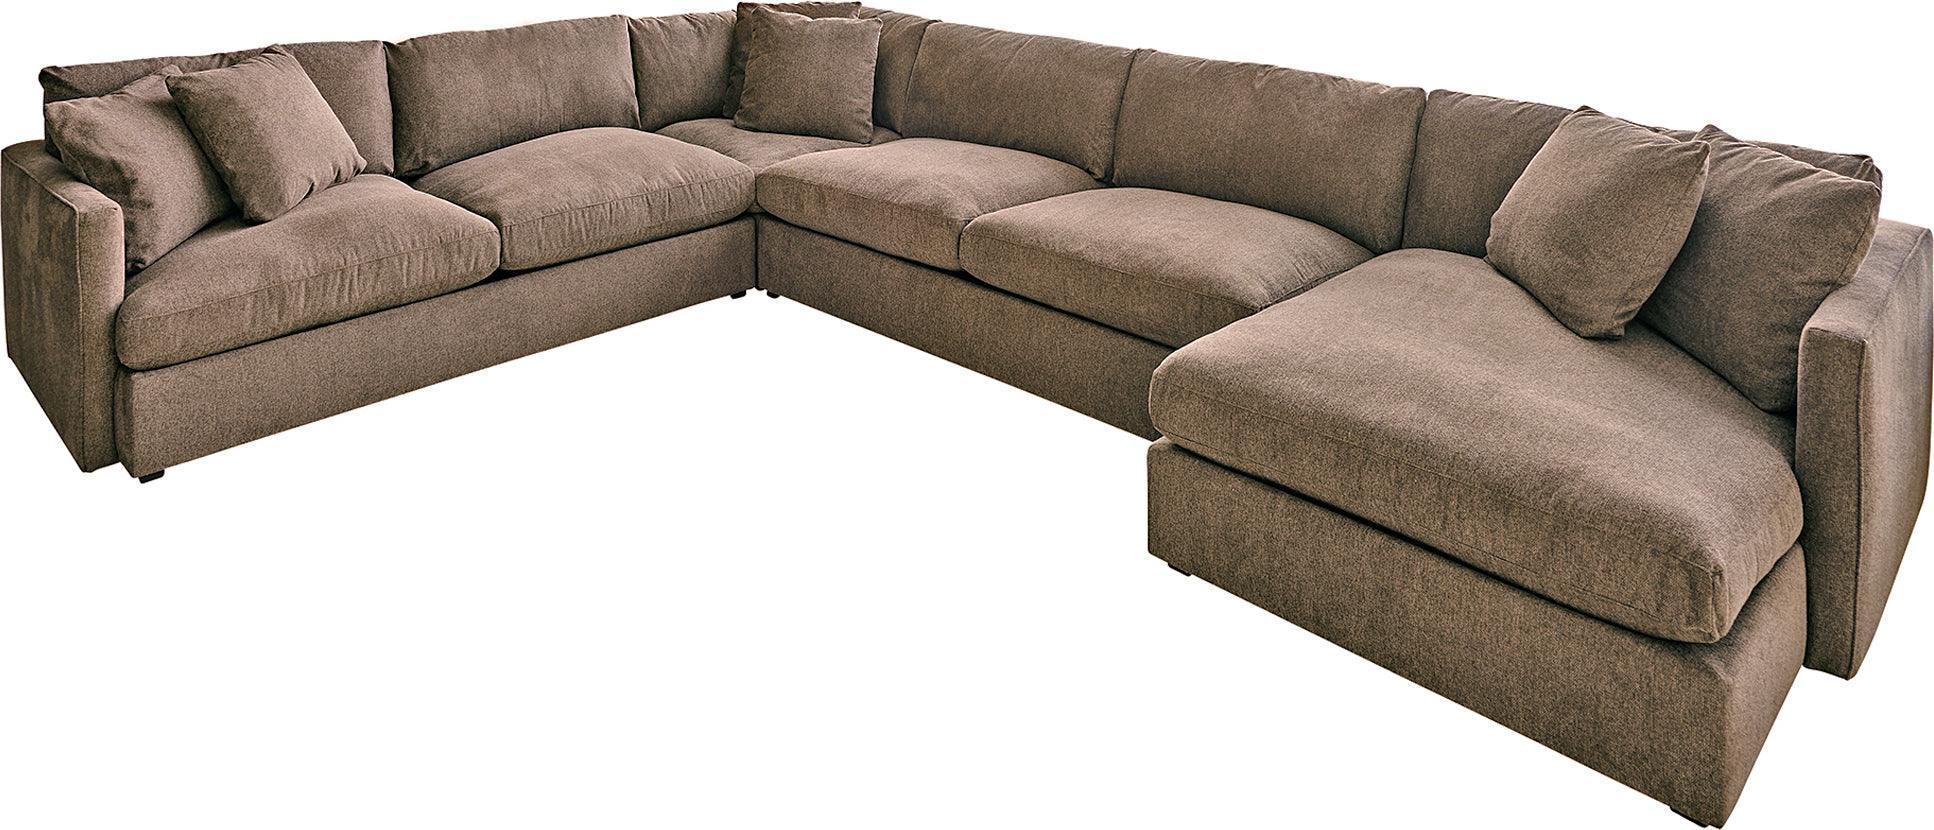 Elements Sectional Sofas - Maddox Right Arm Facing 4 Piece Sectional Set Cocoa